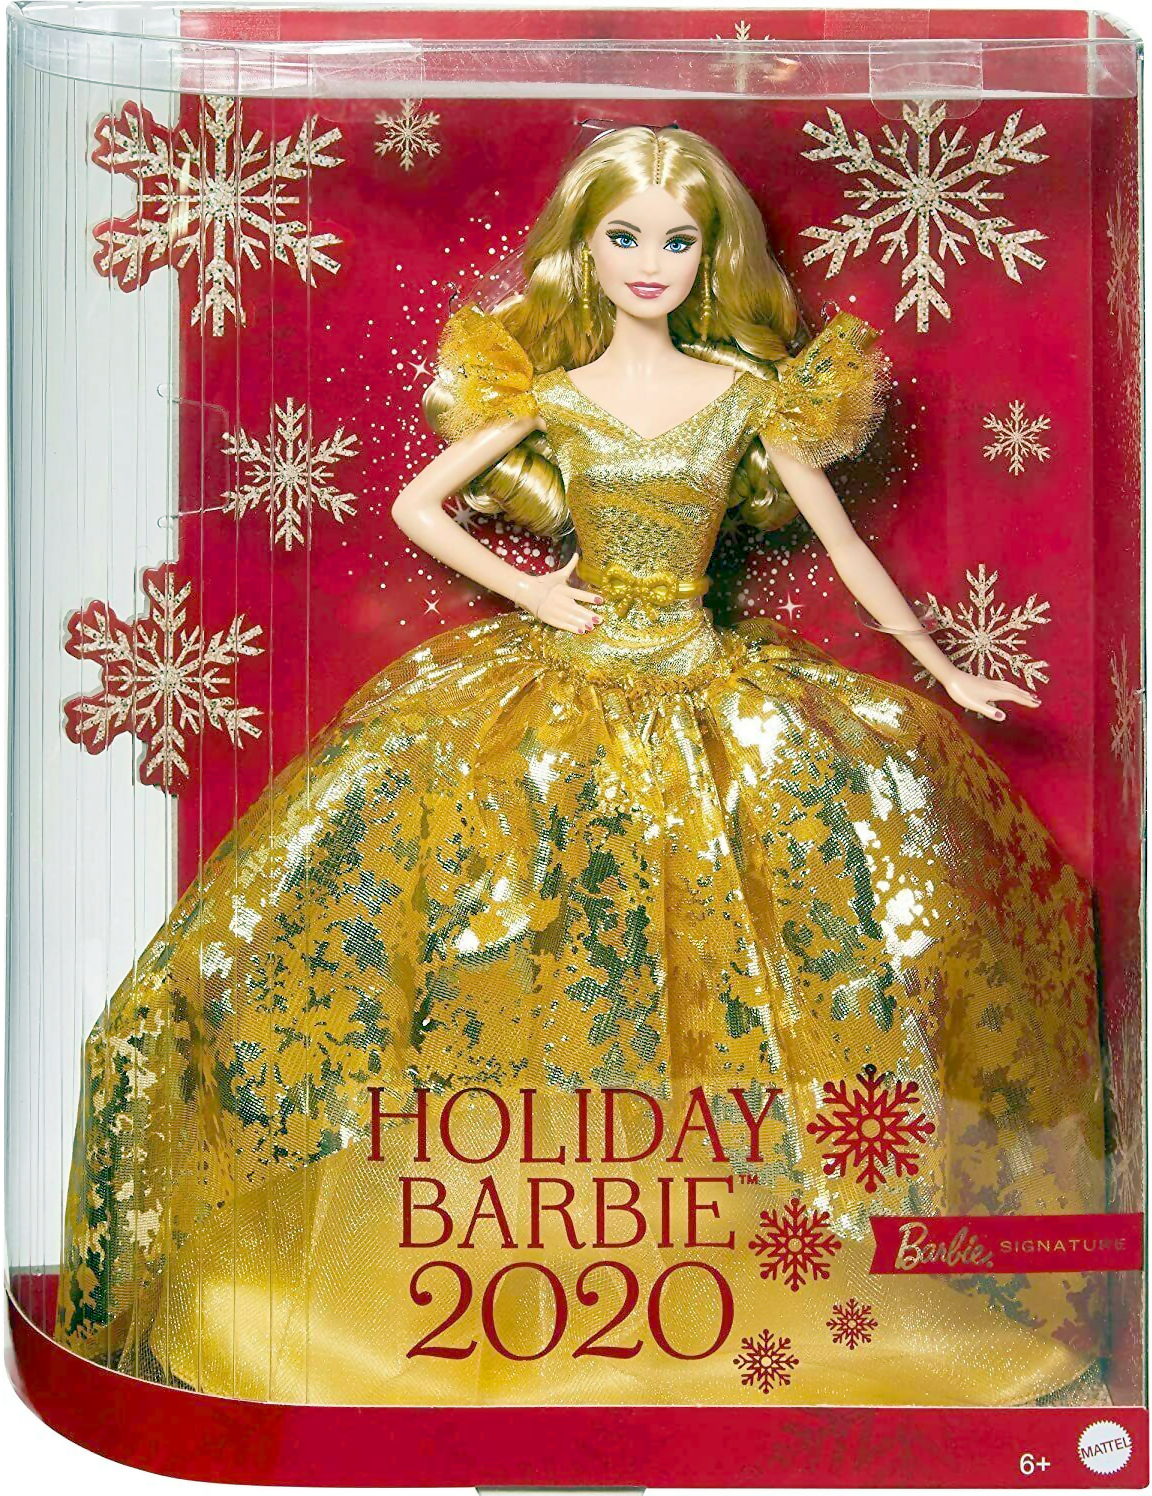 2020 Holiday Barbie (GHT54, 2020) details and value